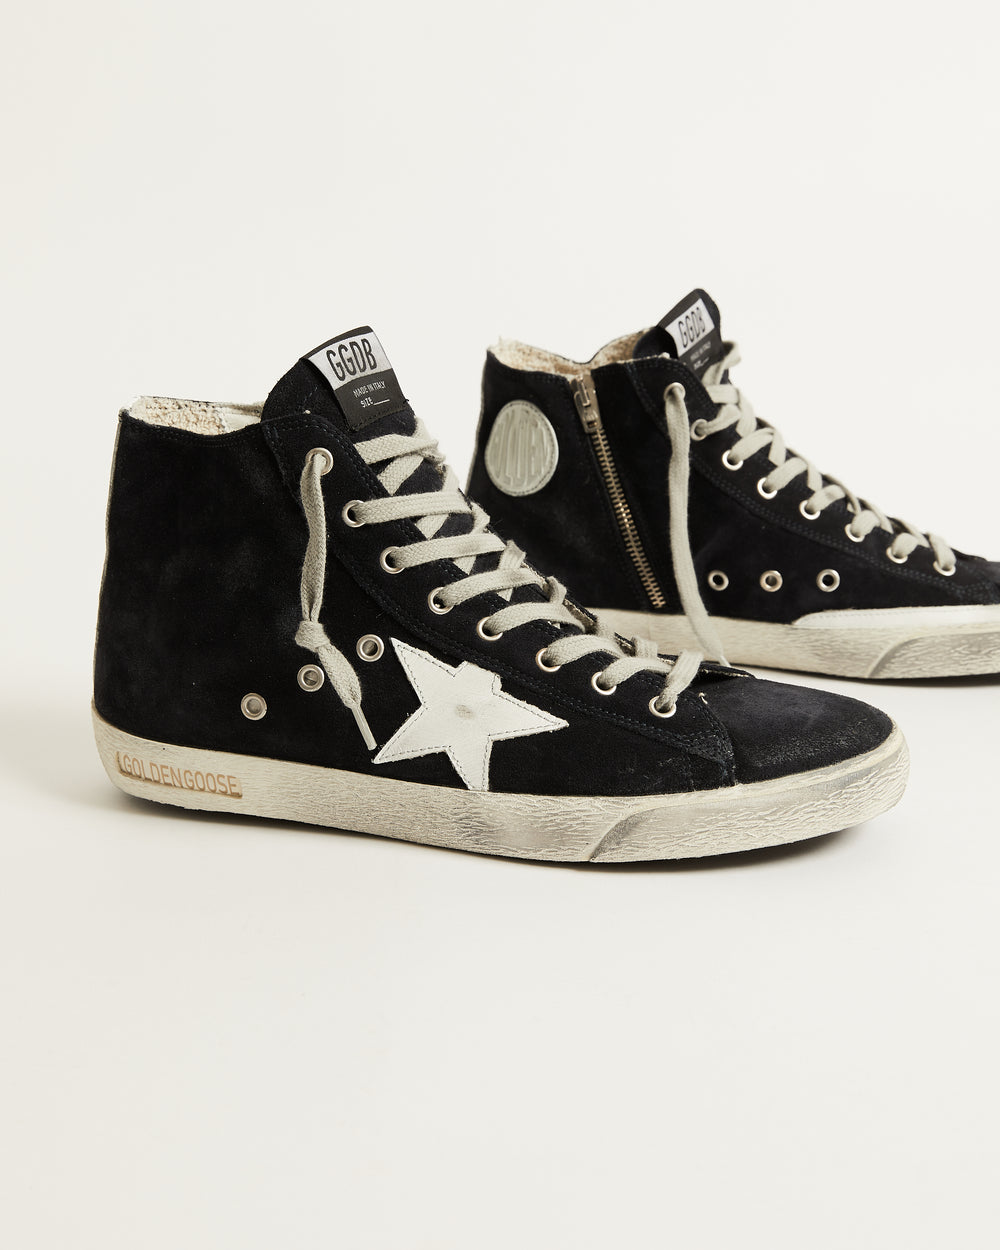 Men's Francy in Night Blue Leather w/ Leather White Star and Heel Tab